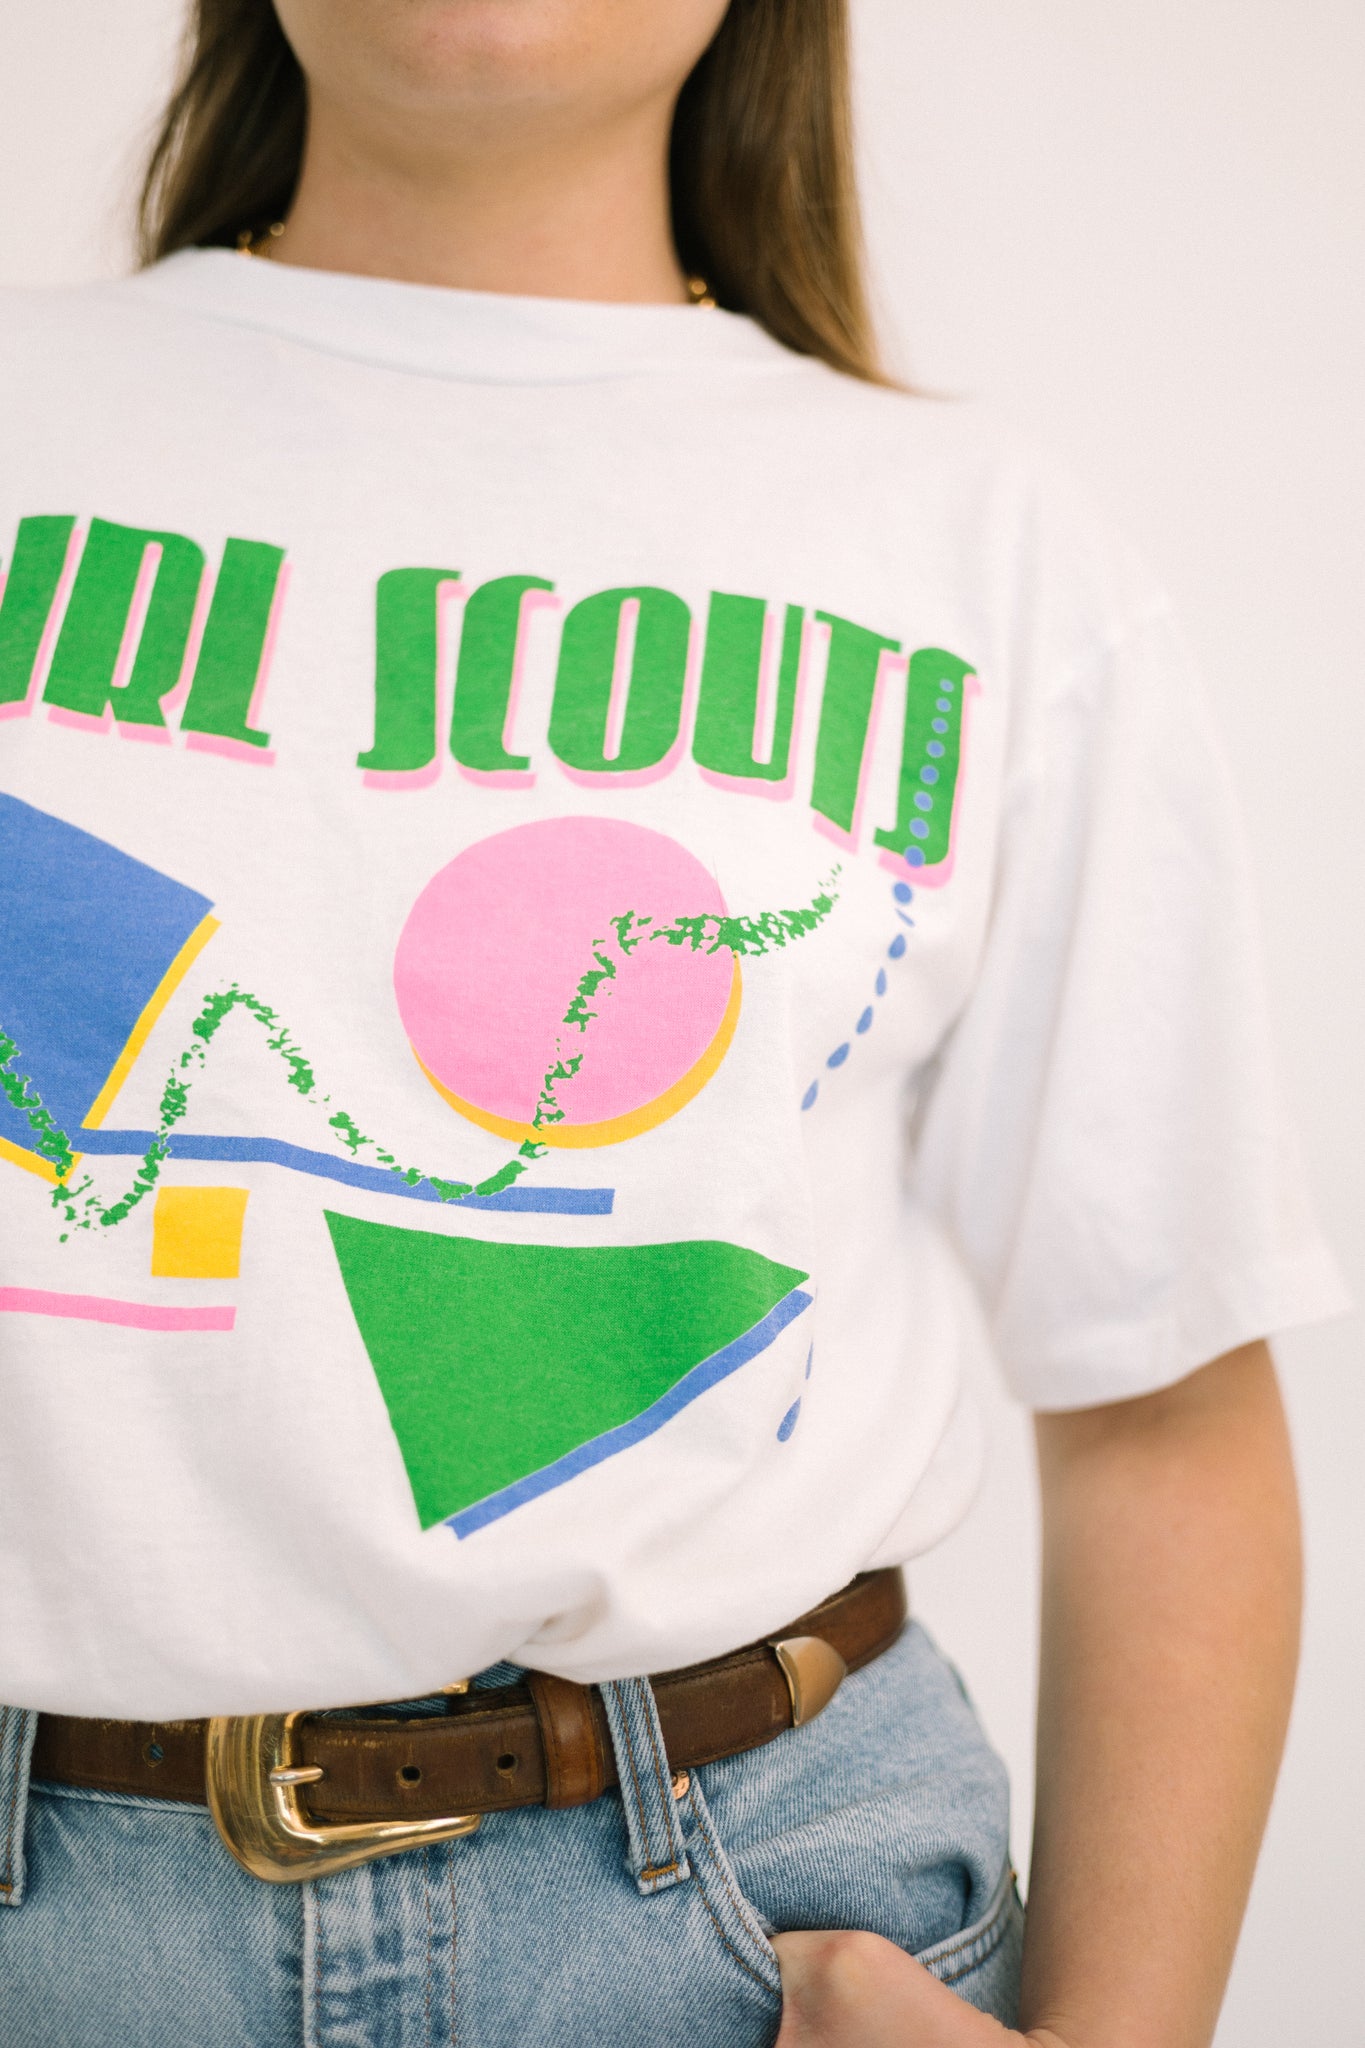 Vintage Girl Scouts T-Shirt